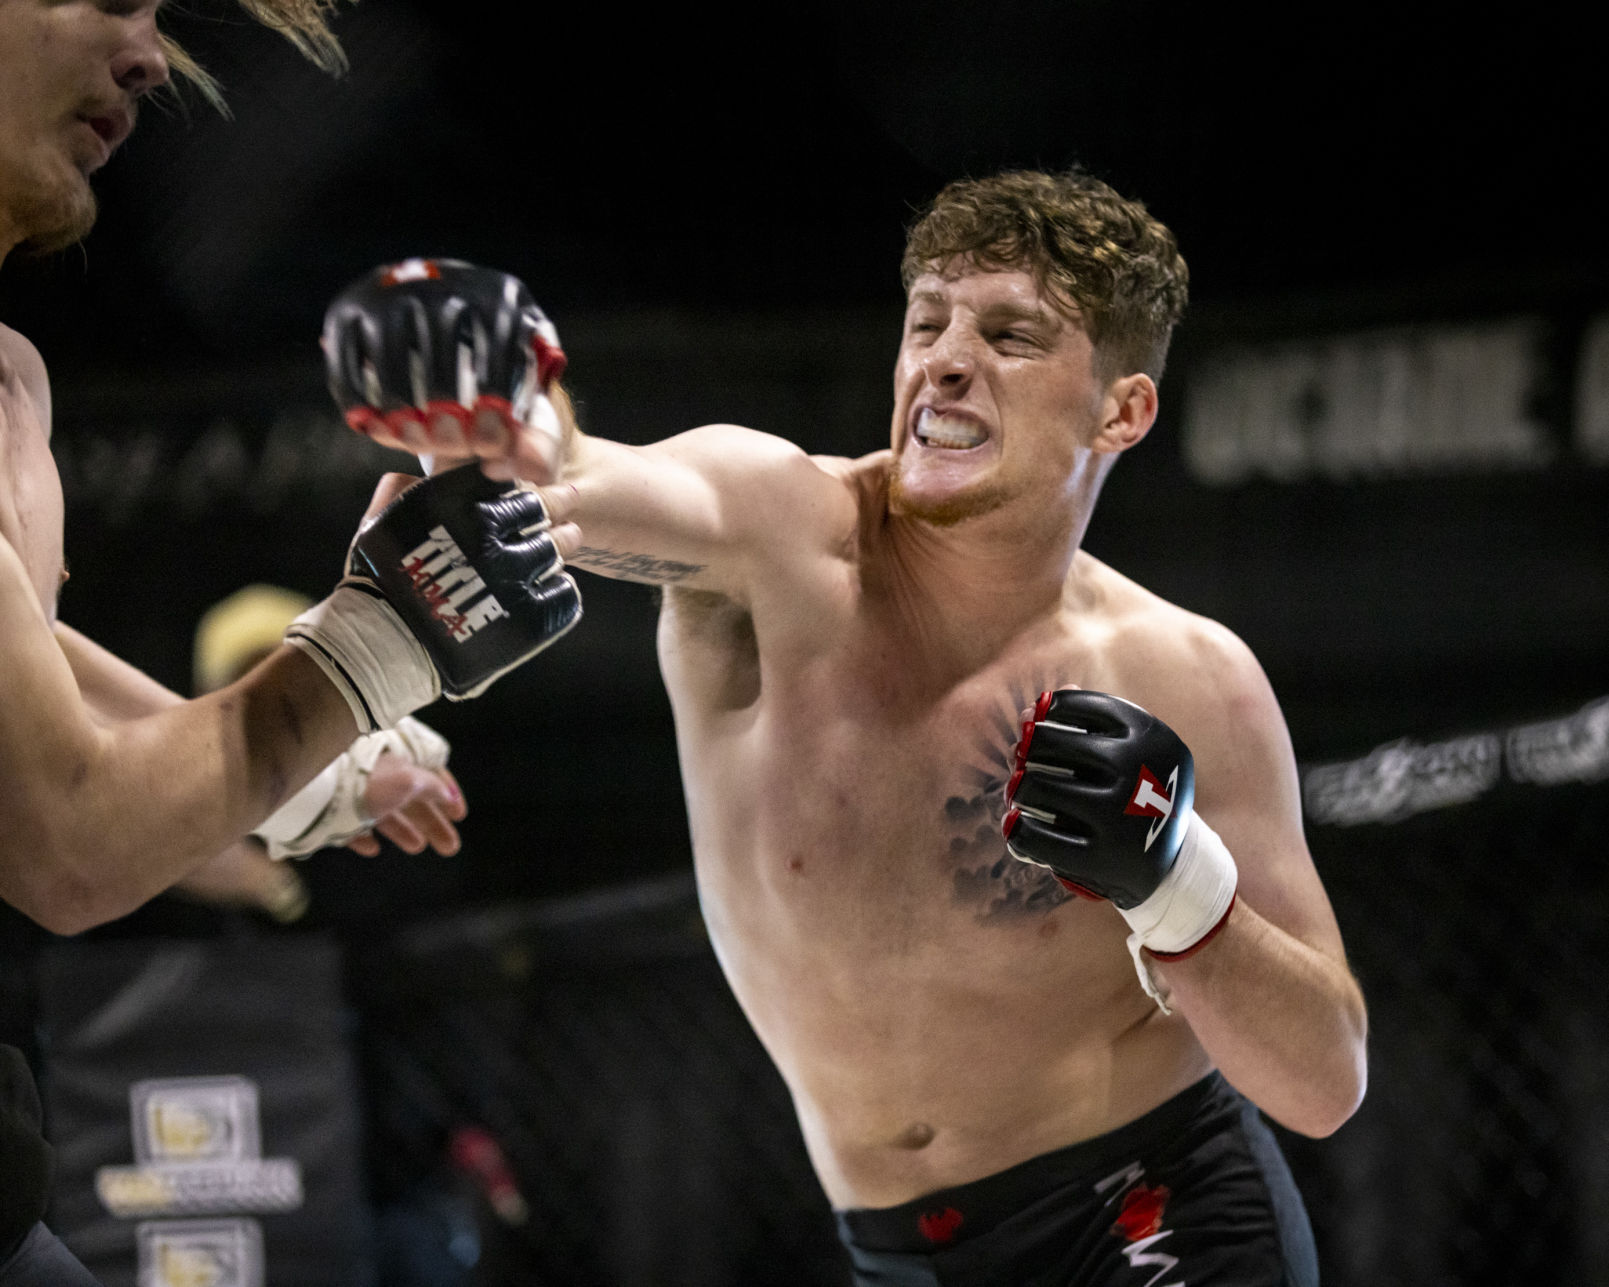 Fights Under the Lights MMA card will be contested Saturday at Dehler Park